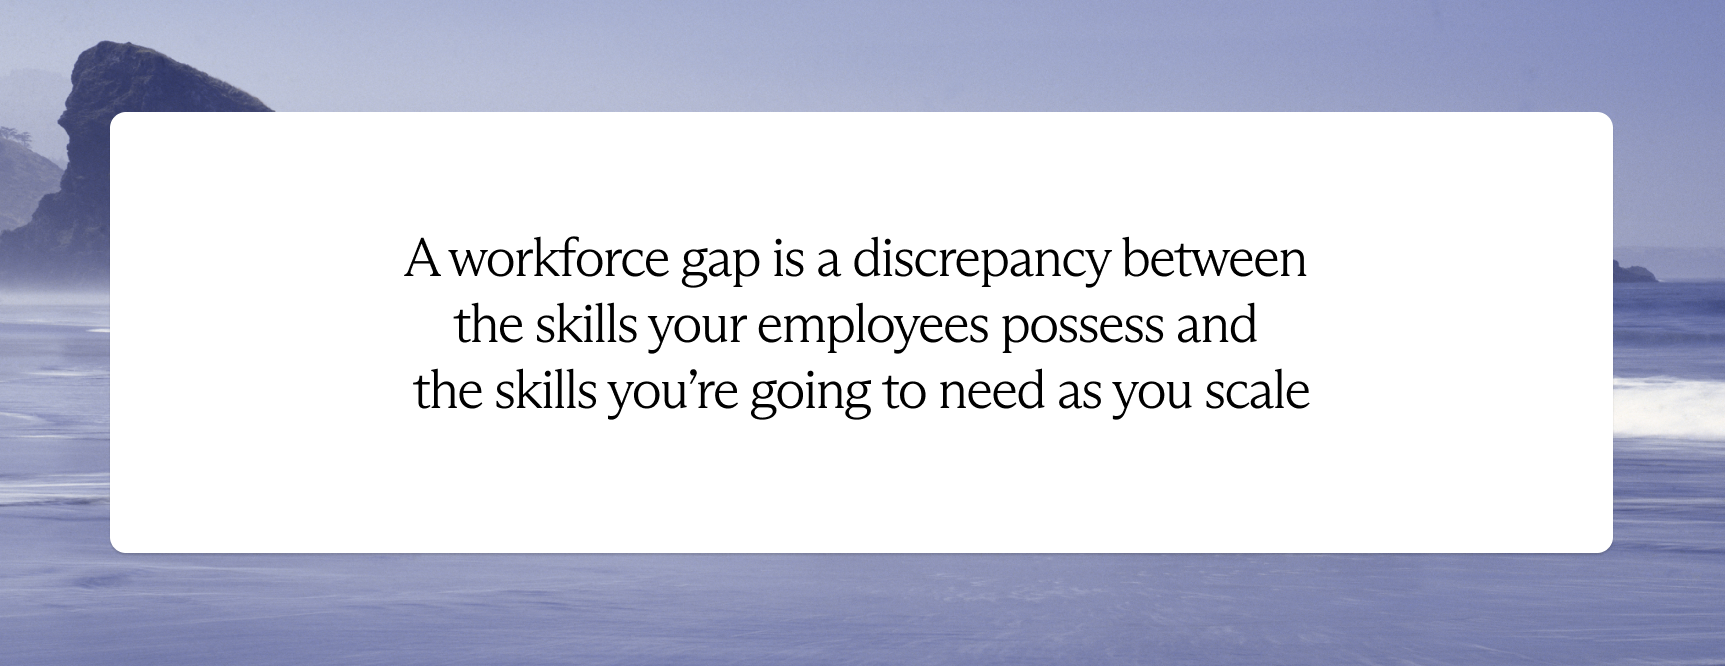 A workforce gap is a discrepancy between the skills your employee possess and the skills you're going to need as you scale. 